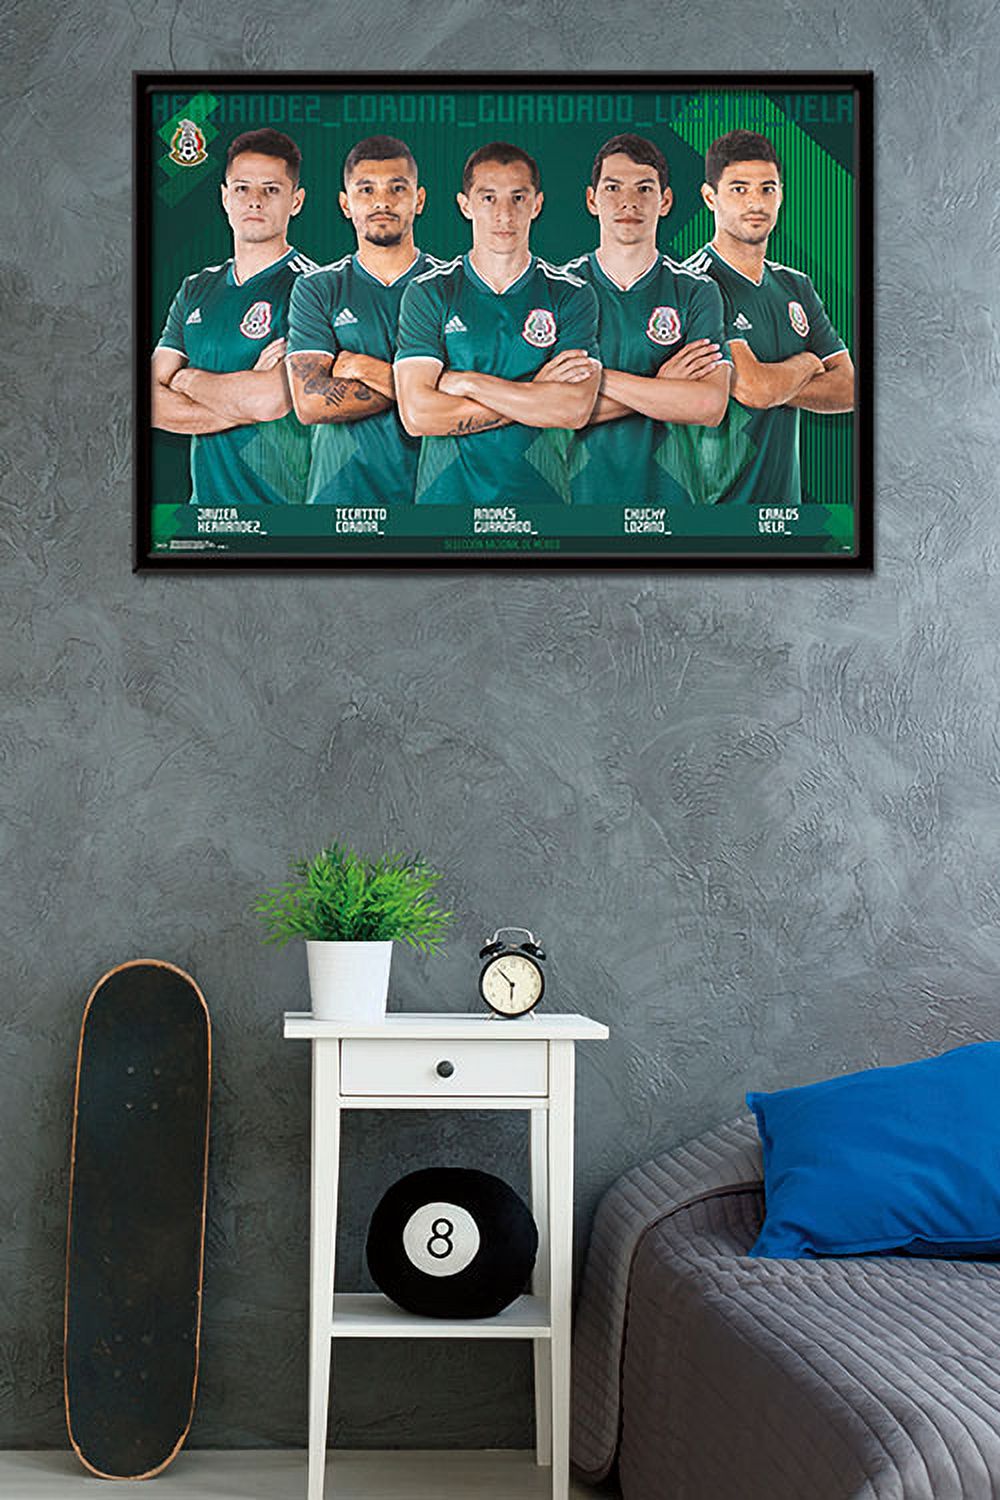 Mexico National Soccer Team - Team - image 2 of 2